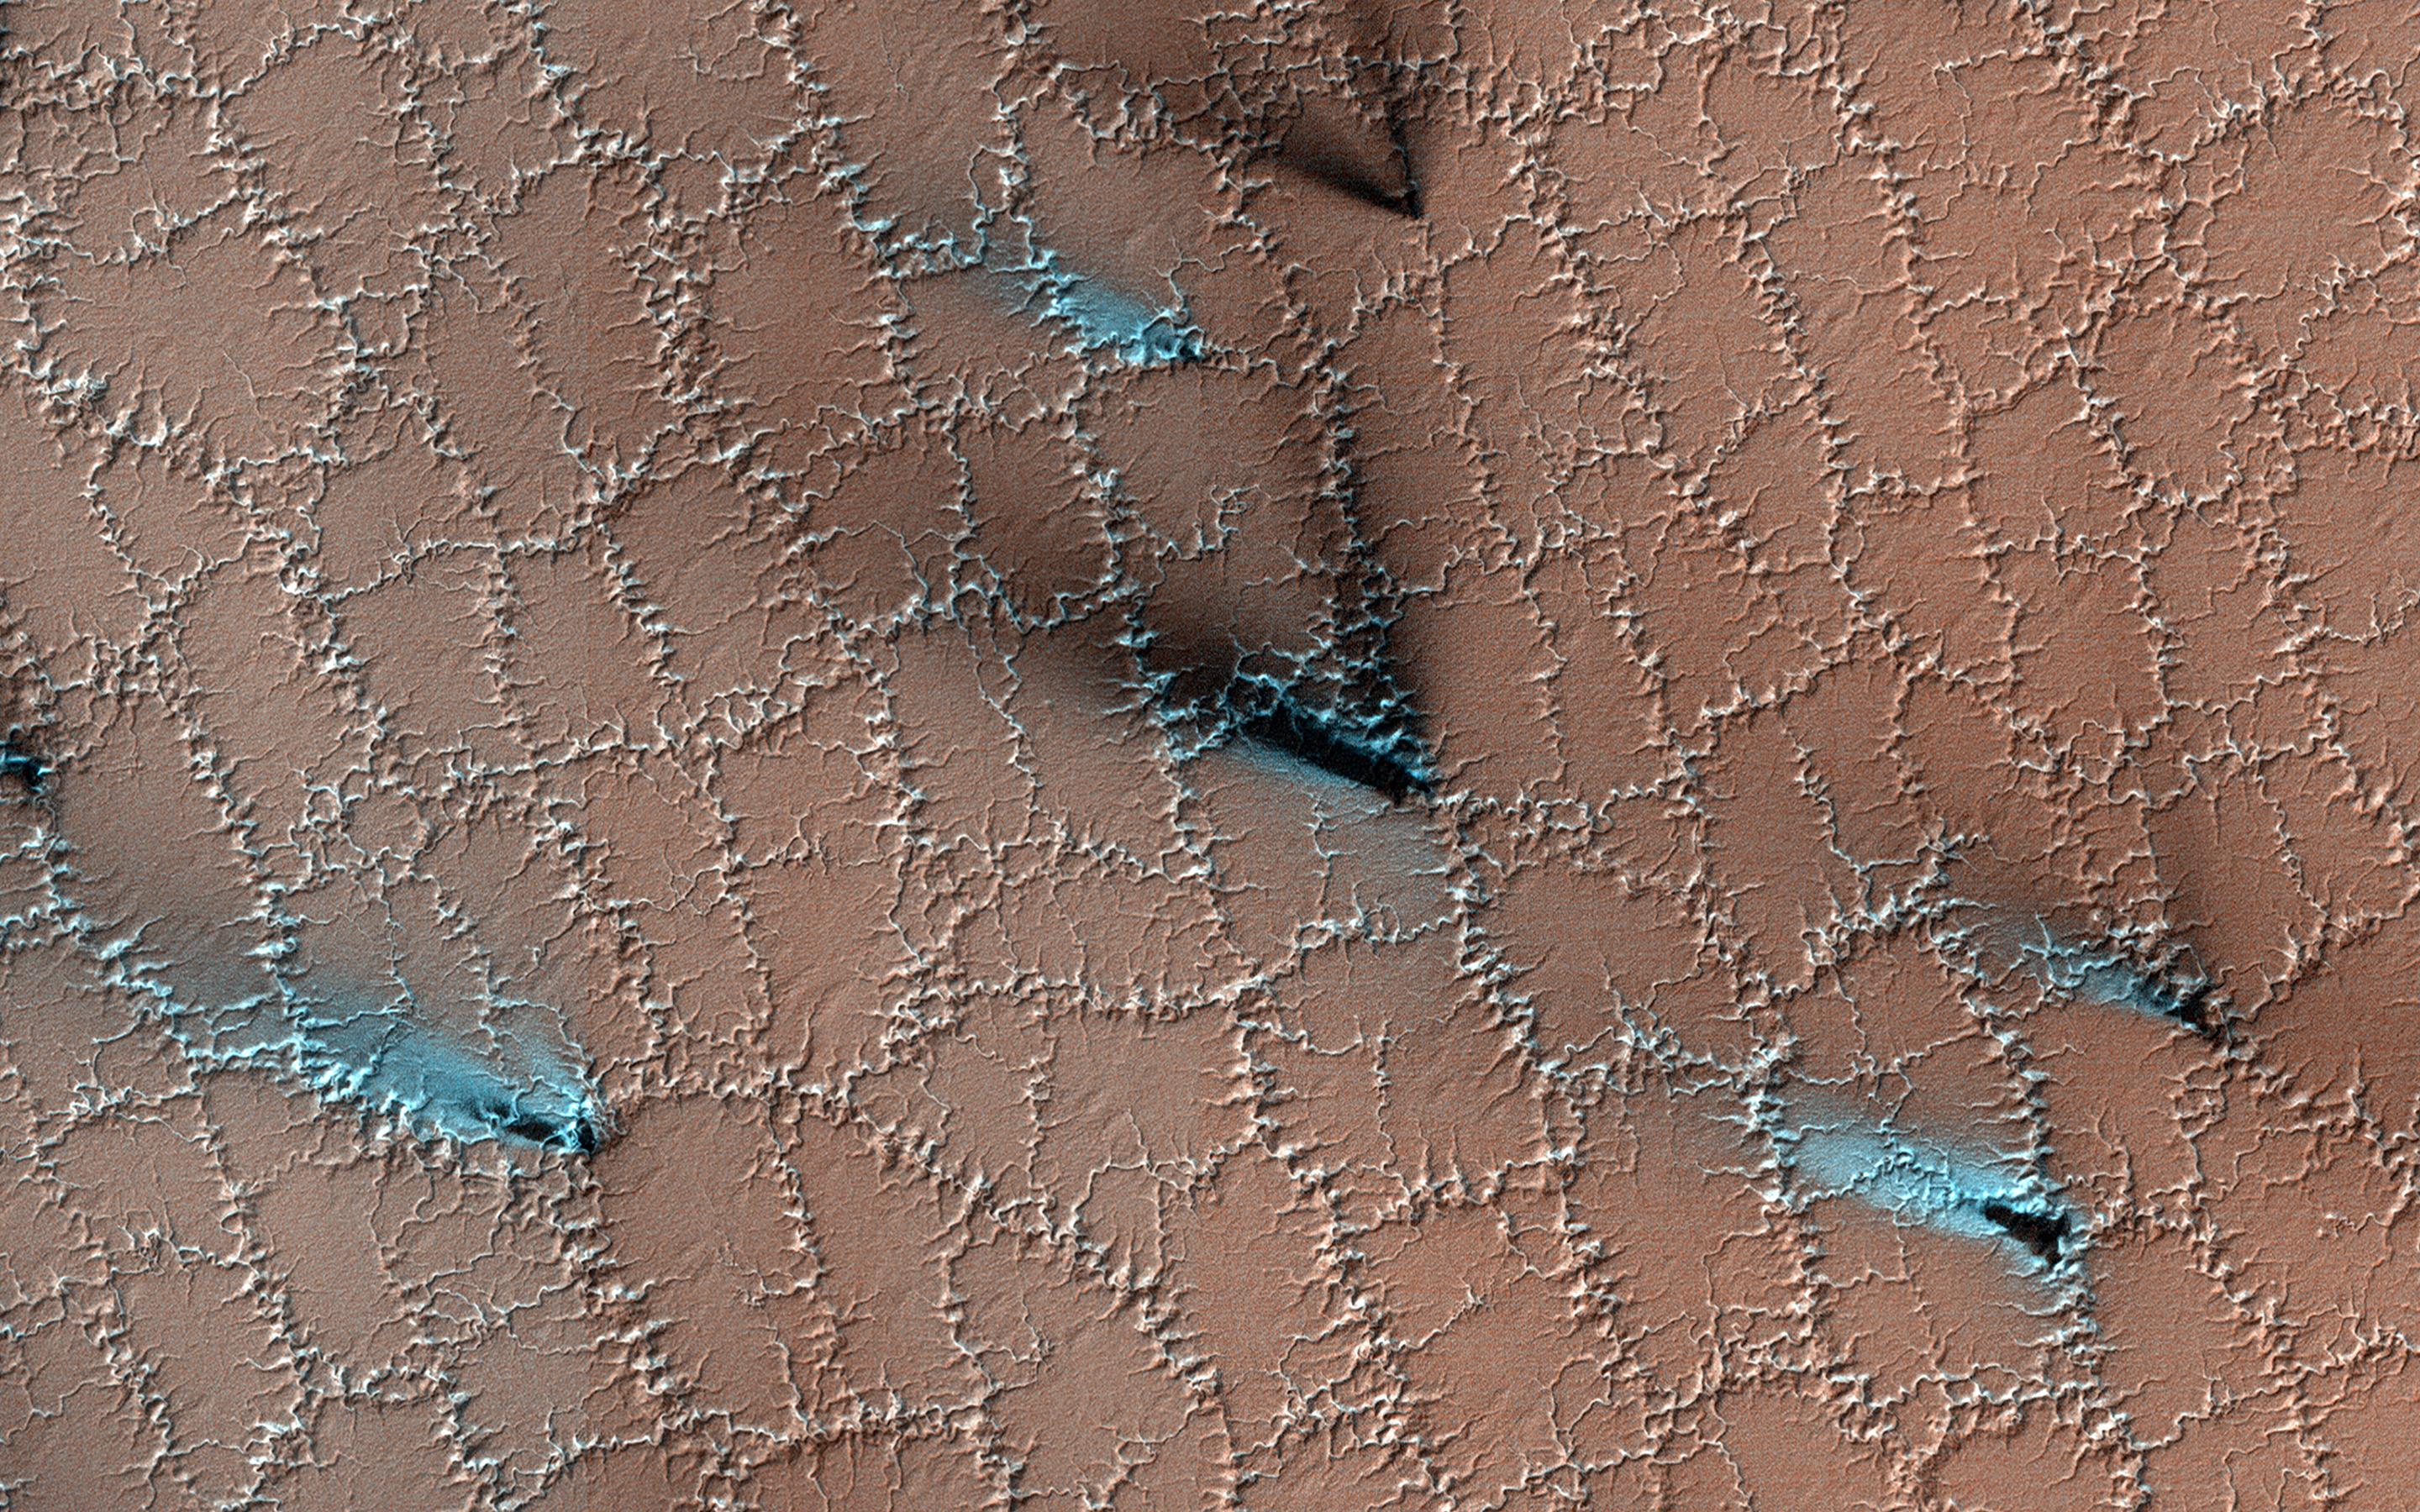 HiRISE captured this spring scene, when water ice frozen in the soil had split the ground into polygons. Translucent carbon dioxide ice allows sunlight to shine through and heat gases that escape through vents, releasing fans of darker material onto the surface (shown as blue in this enhanced-color image).